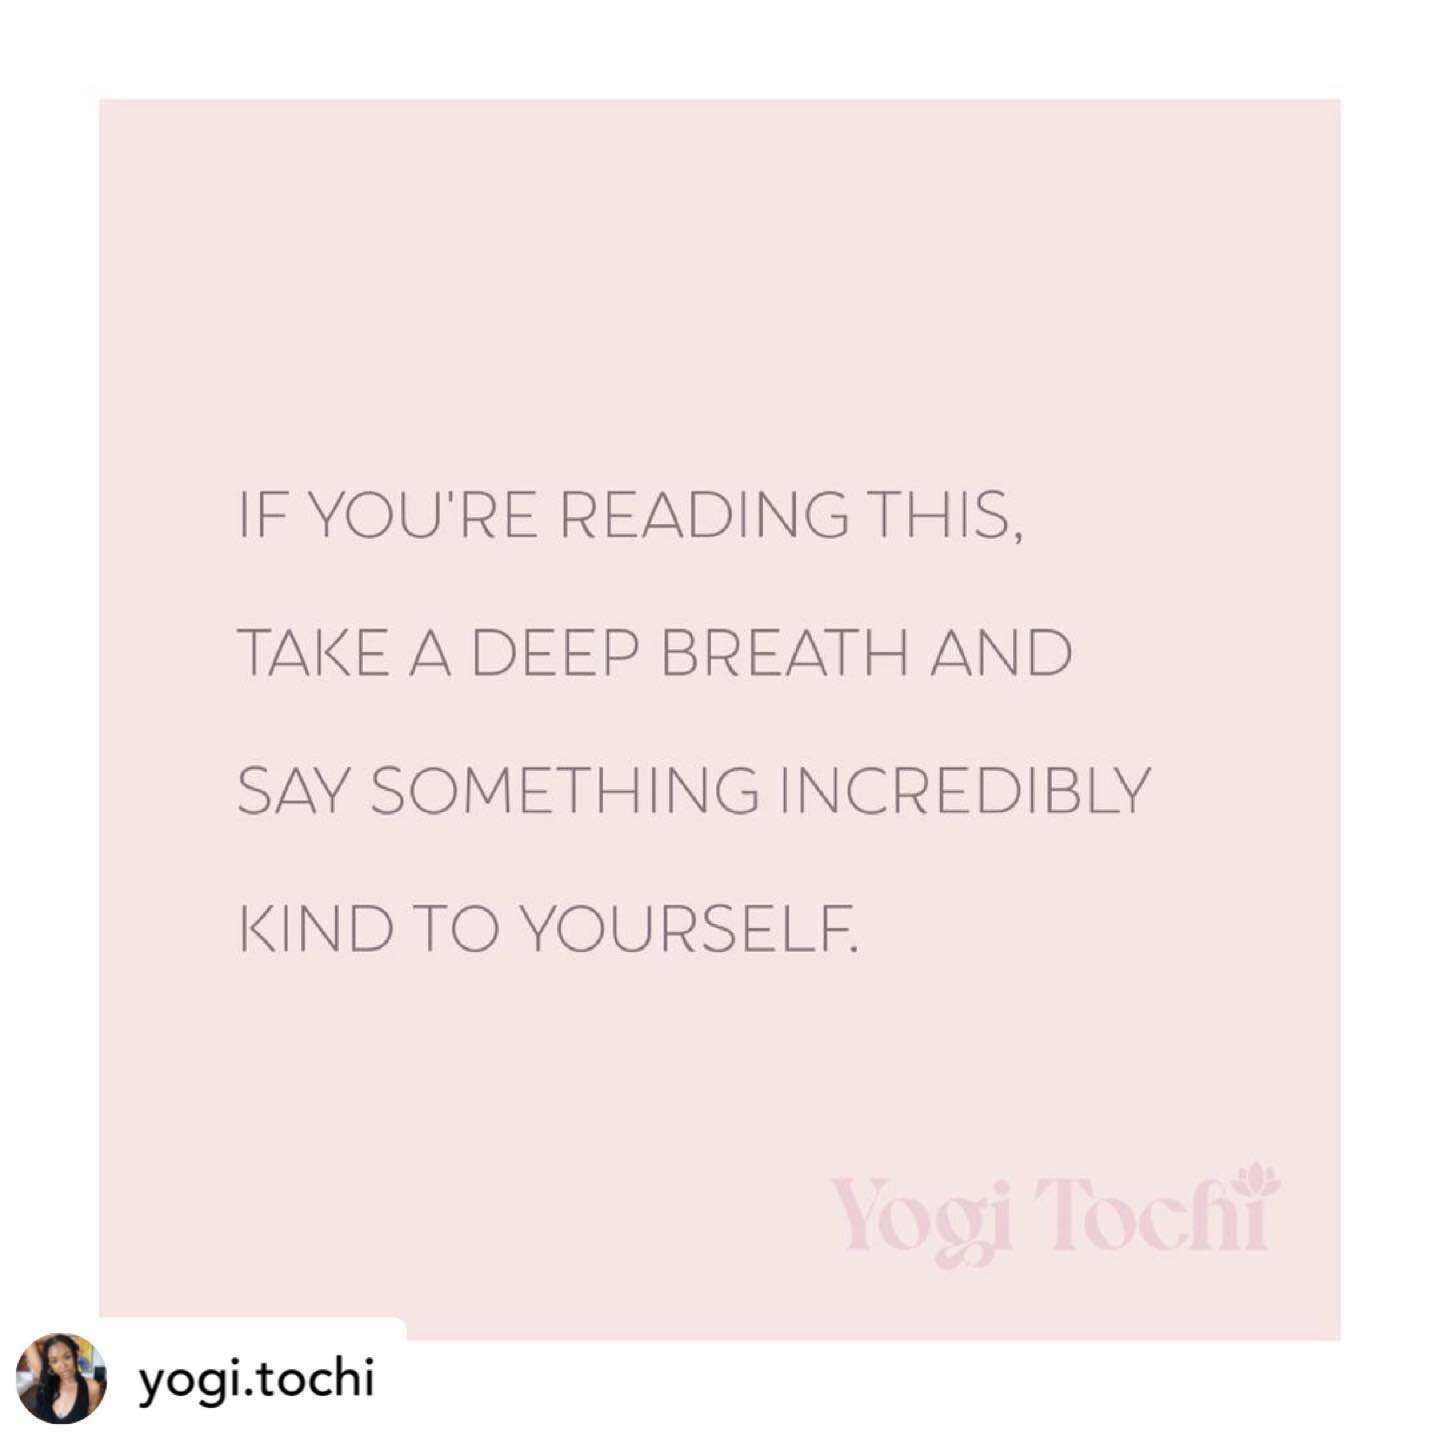 What&rsquo;s the kindest thing you can say to yourself today?

Sometimes it can be so much easier to be kind to everyone but ourselves. 

Take a deep breath and know you are doing your best ! 

#breathemomma #breathisbest #goeasyonyourself #bekindtoy